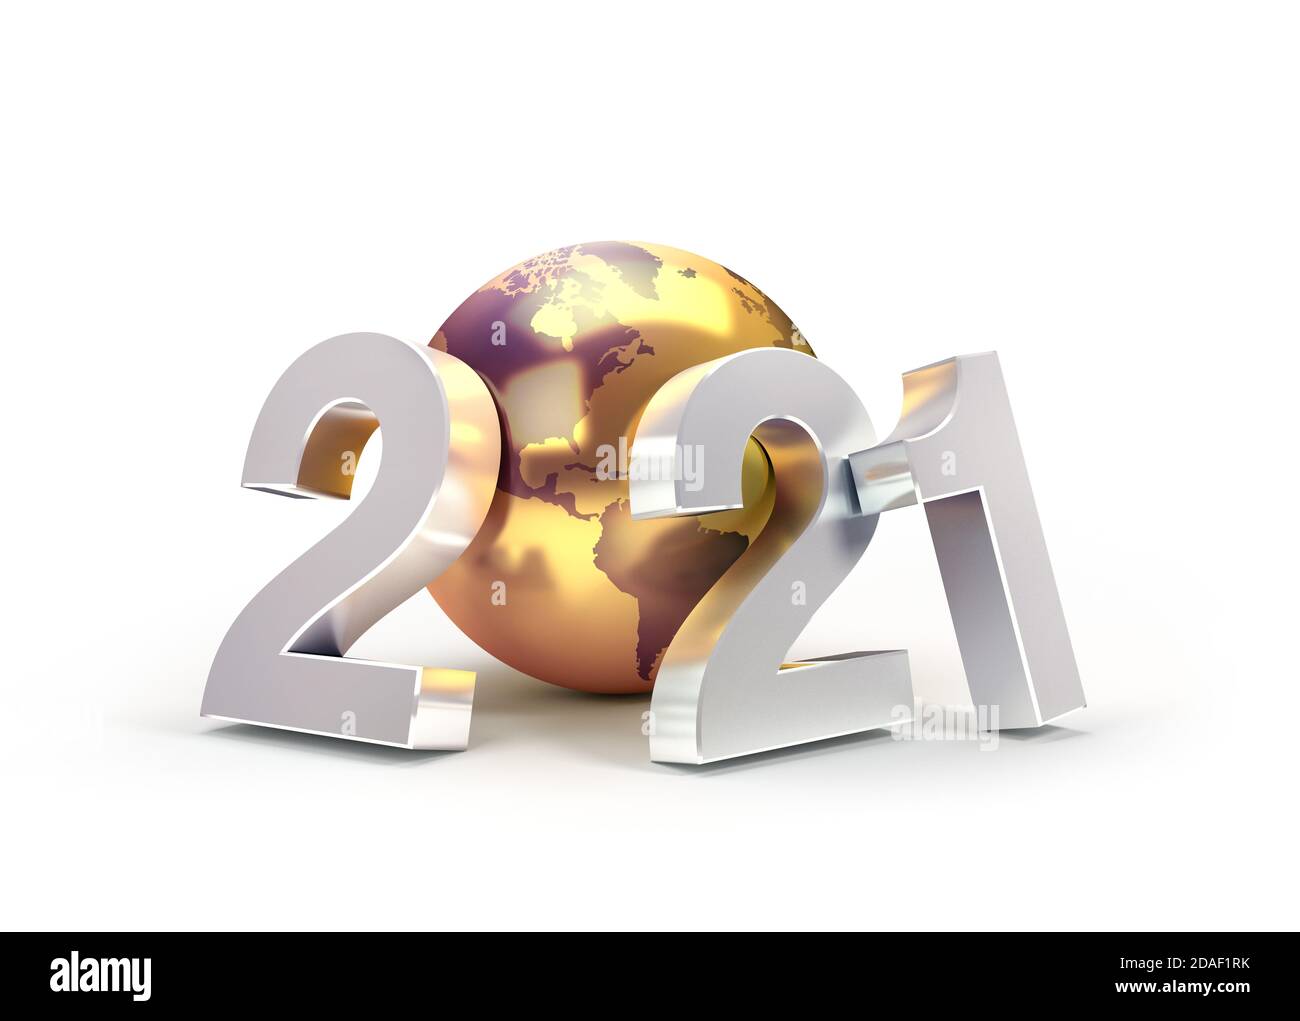 2021 New Year date number composed with a golden planet earth, focused on America, isolated on white - 3D illustration Stock Photo